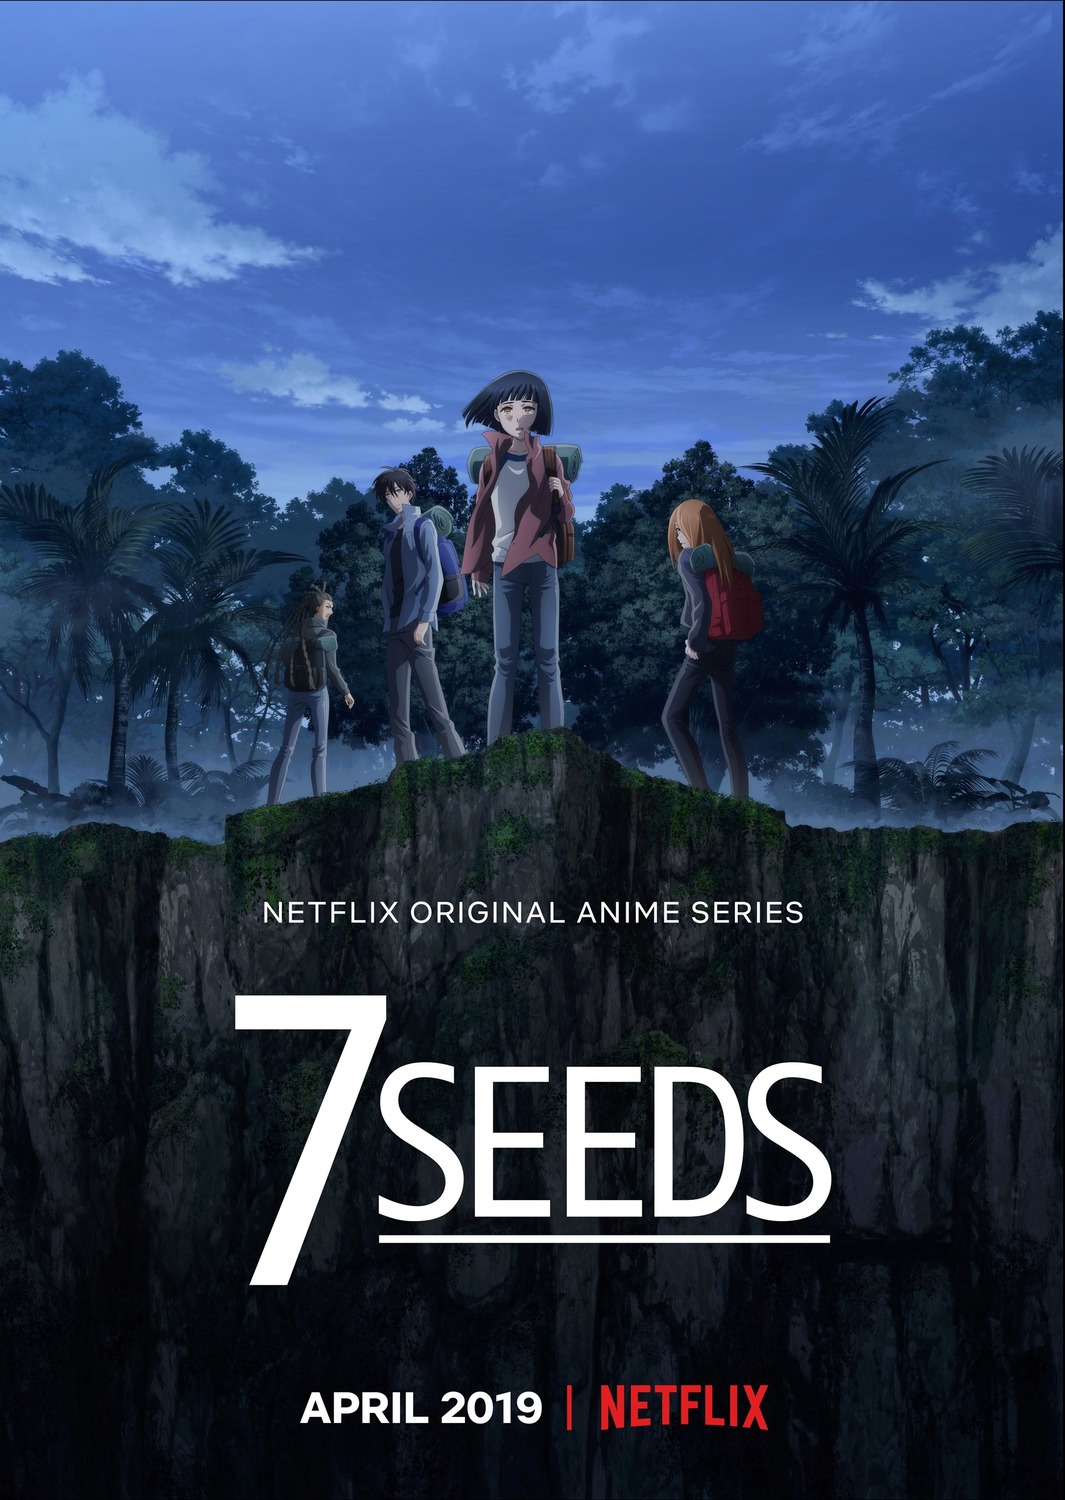 Extra Large TV Poster Image for 7Seeds 